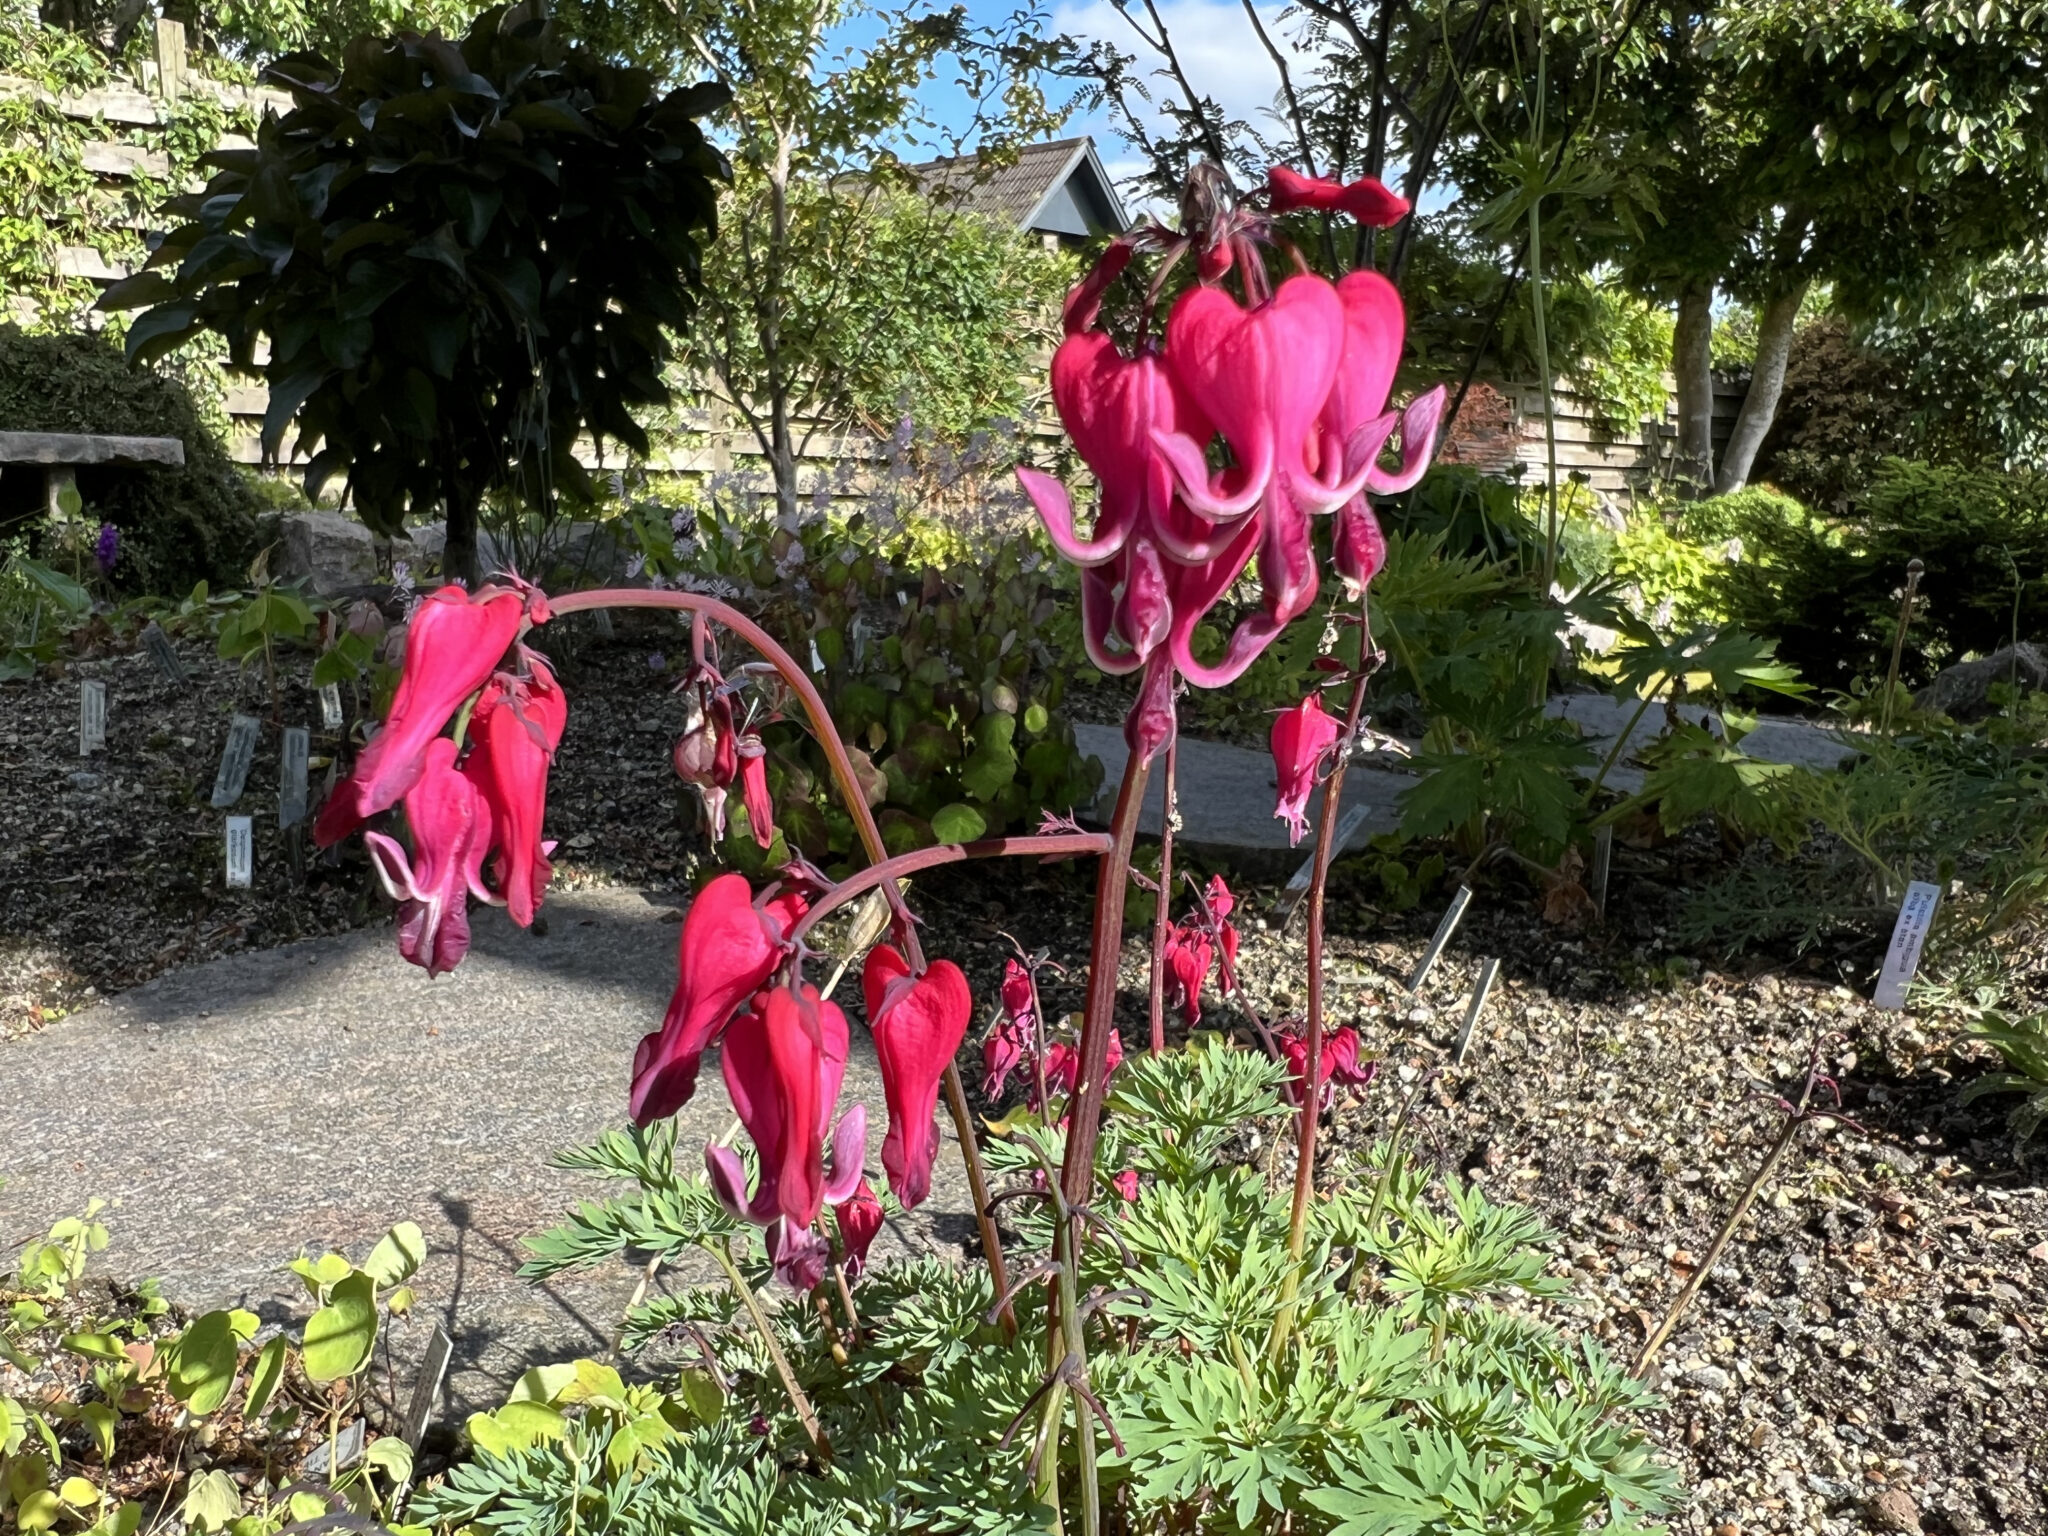 Dicentra 'Red Fountain'